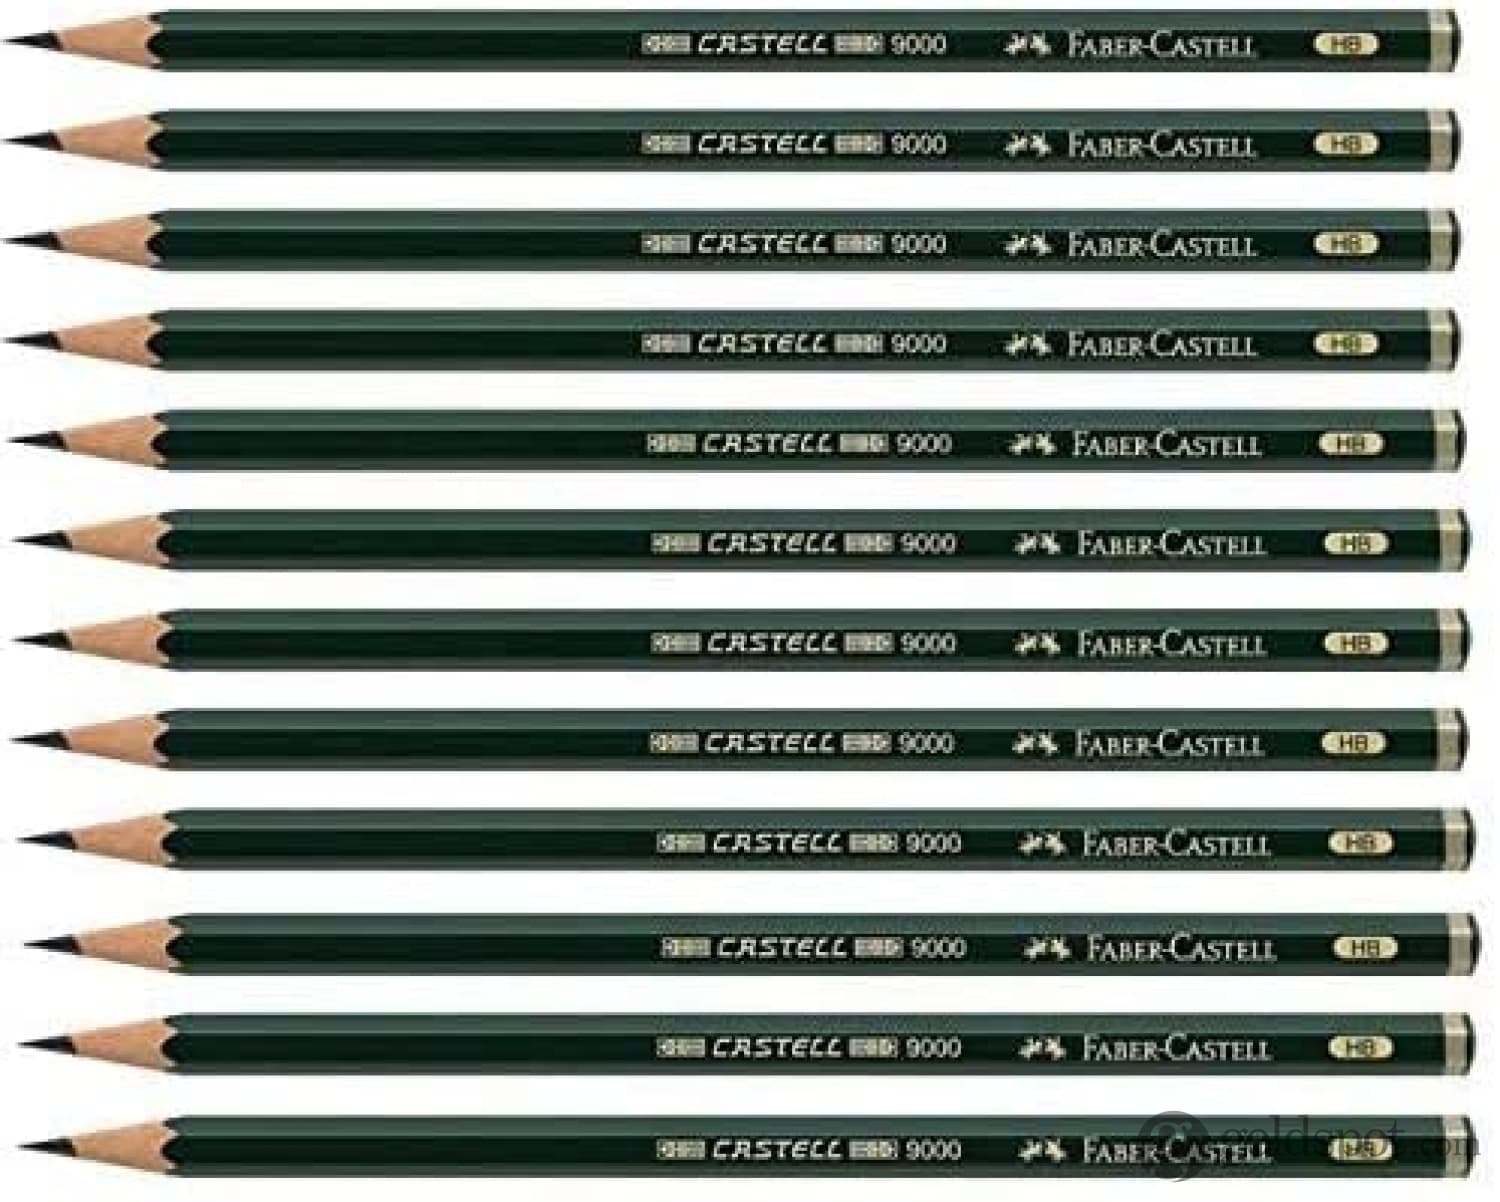 Faber Castell Graphite Pencil 9000 Black Lead Art Draw Write Pack of 12  Pencils 